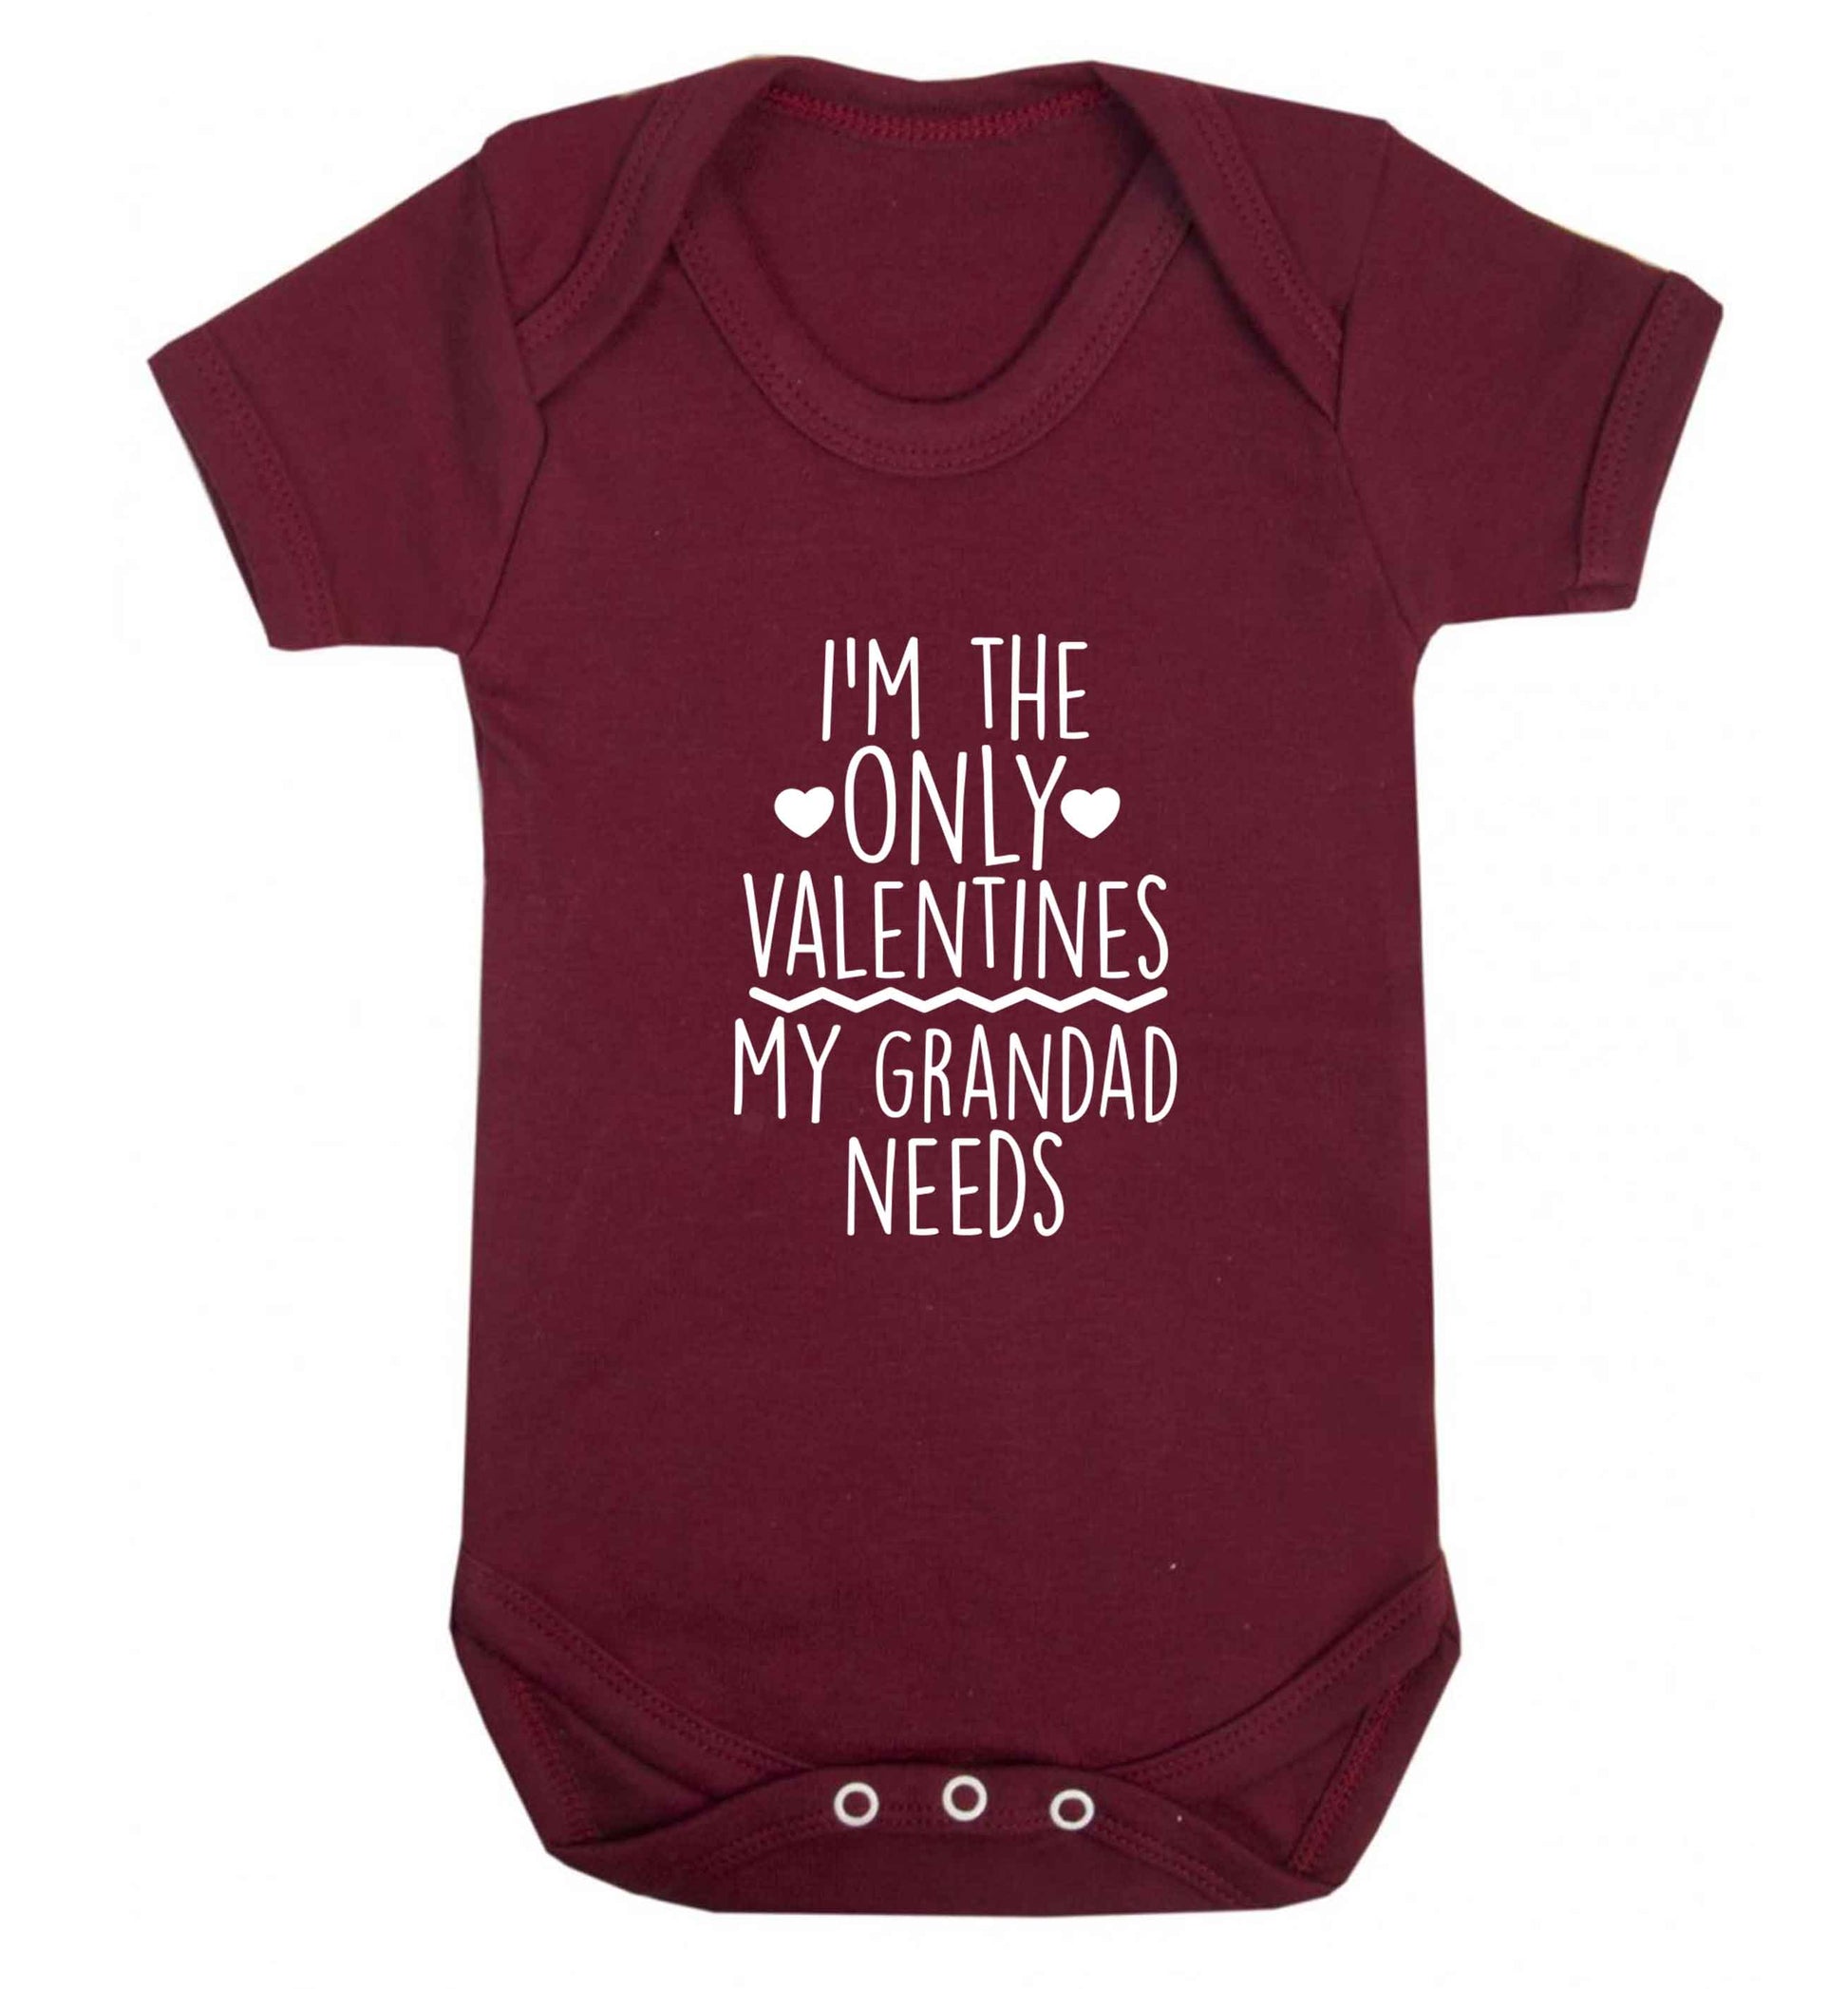 I'm the only valentines my grandad needs baby vest maroon 18-24 months